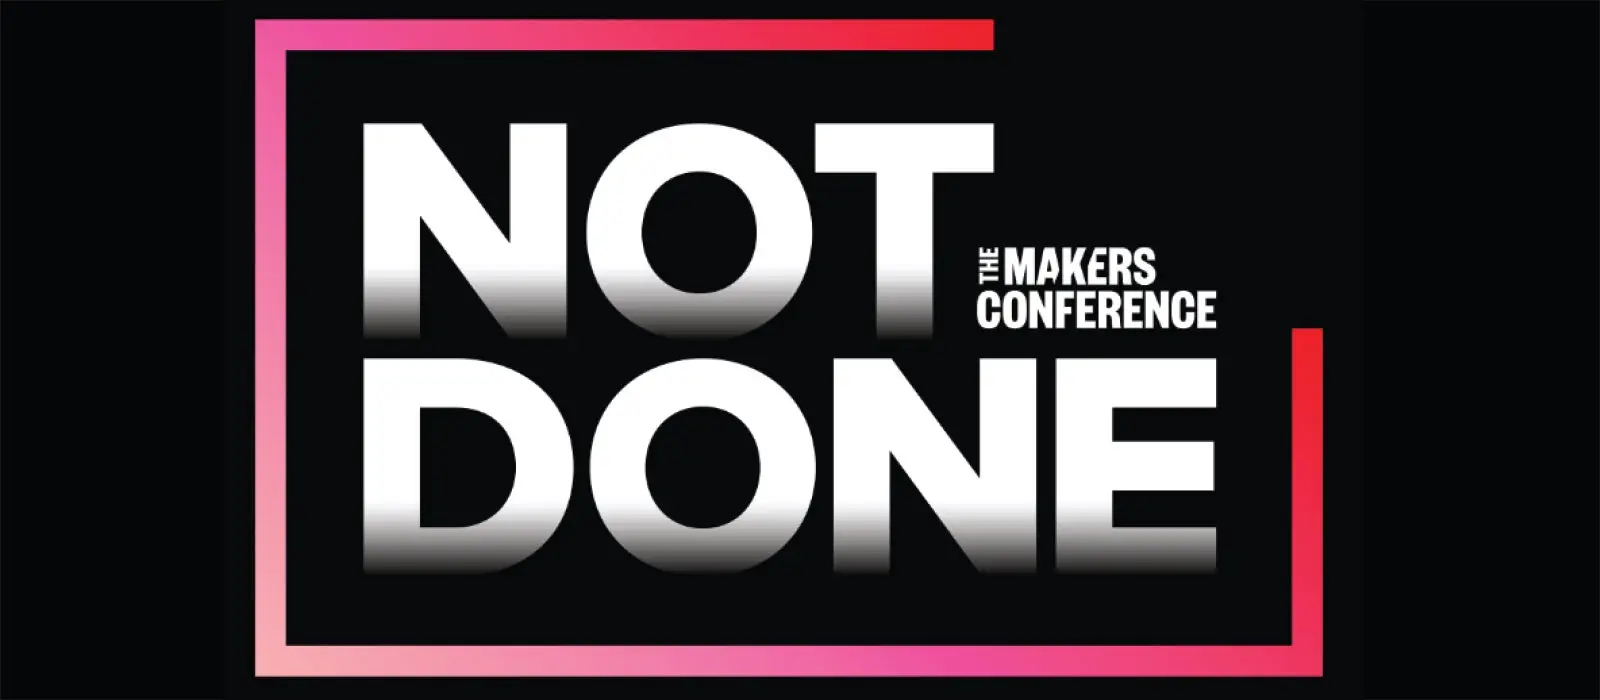 The MAKERS Conference. Event theme: NOT DONE.